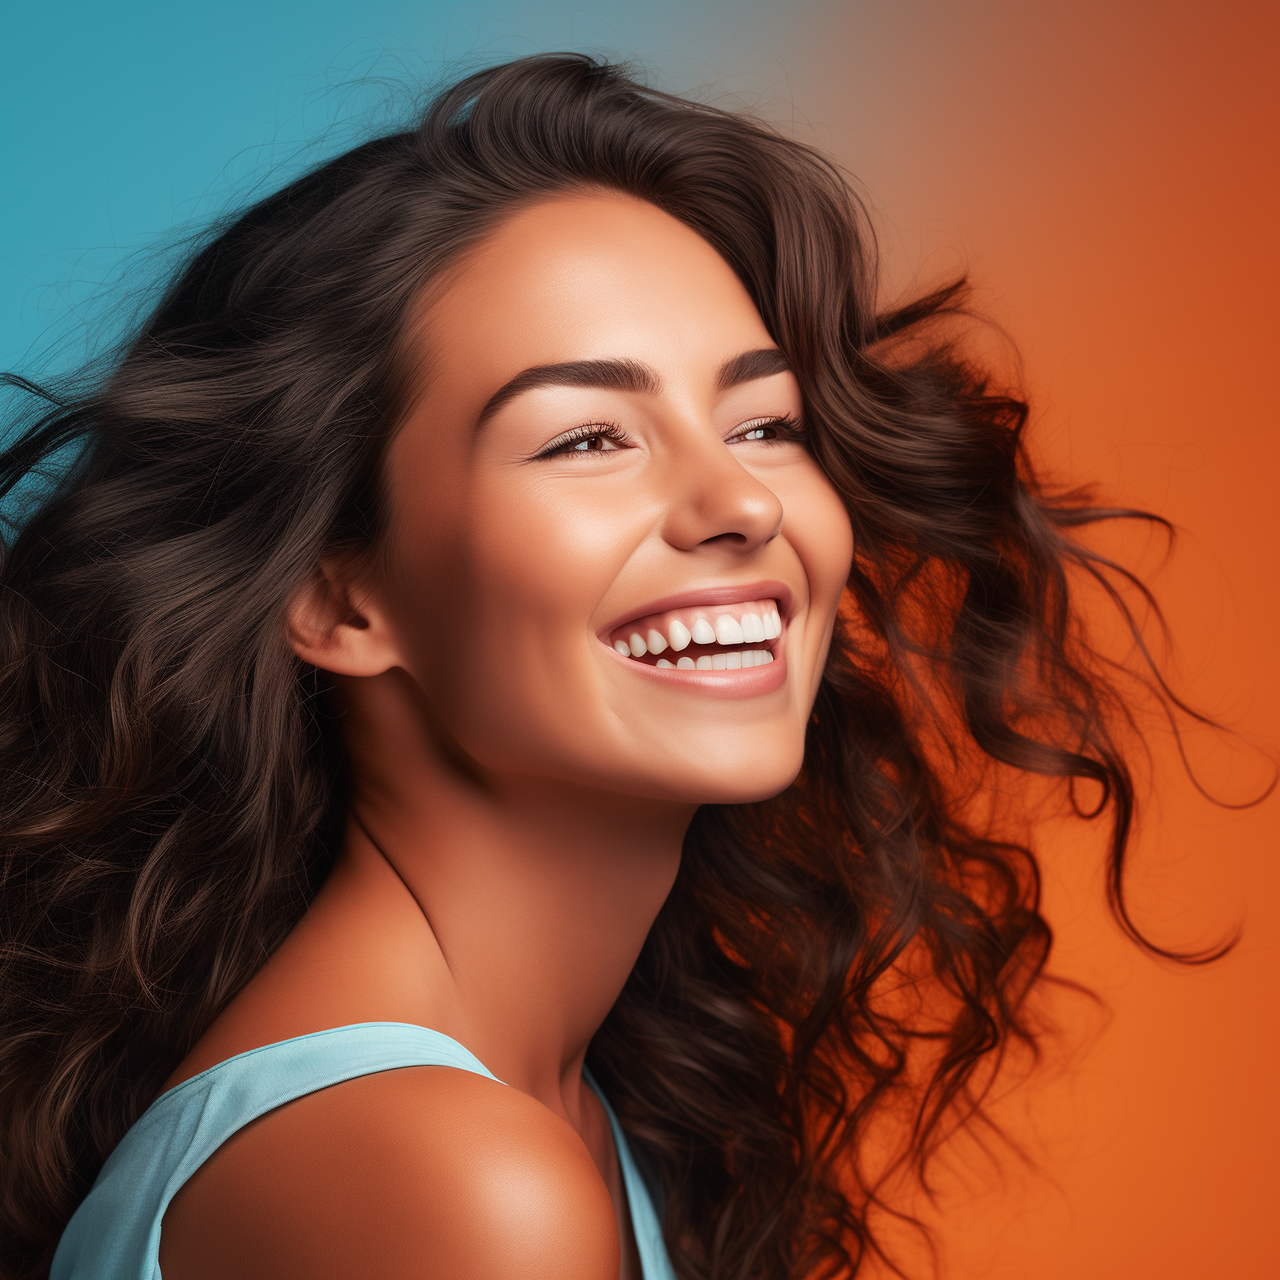 hispanic woman smiling in front of an orange and blue background